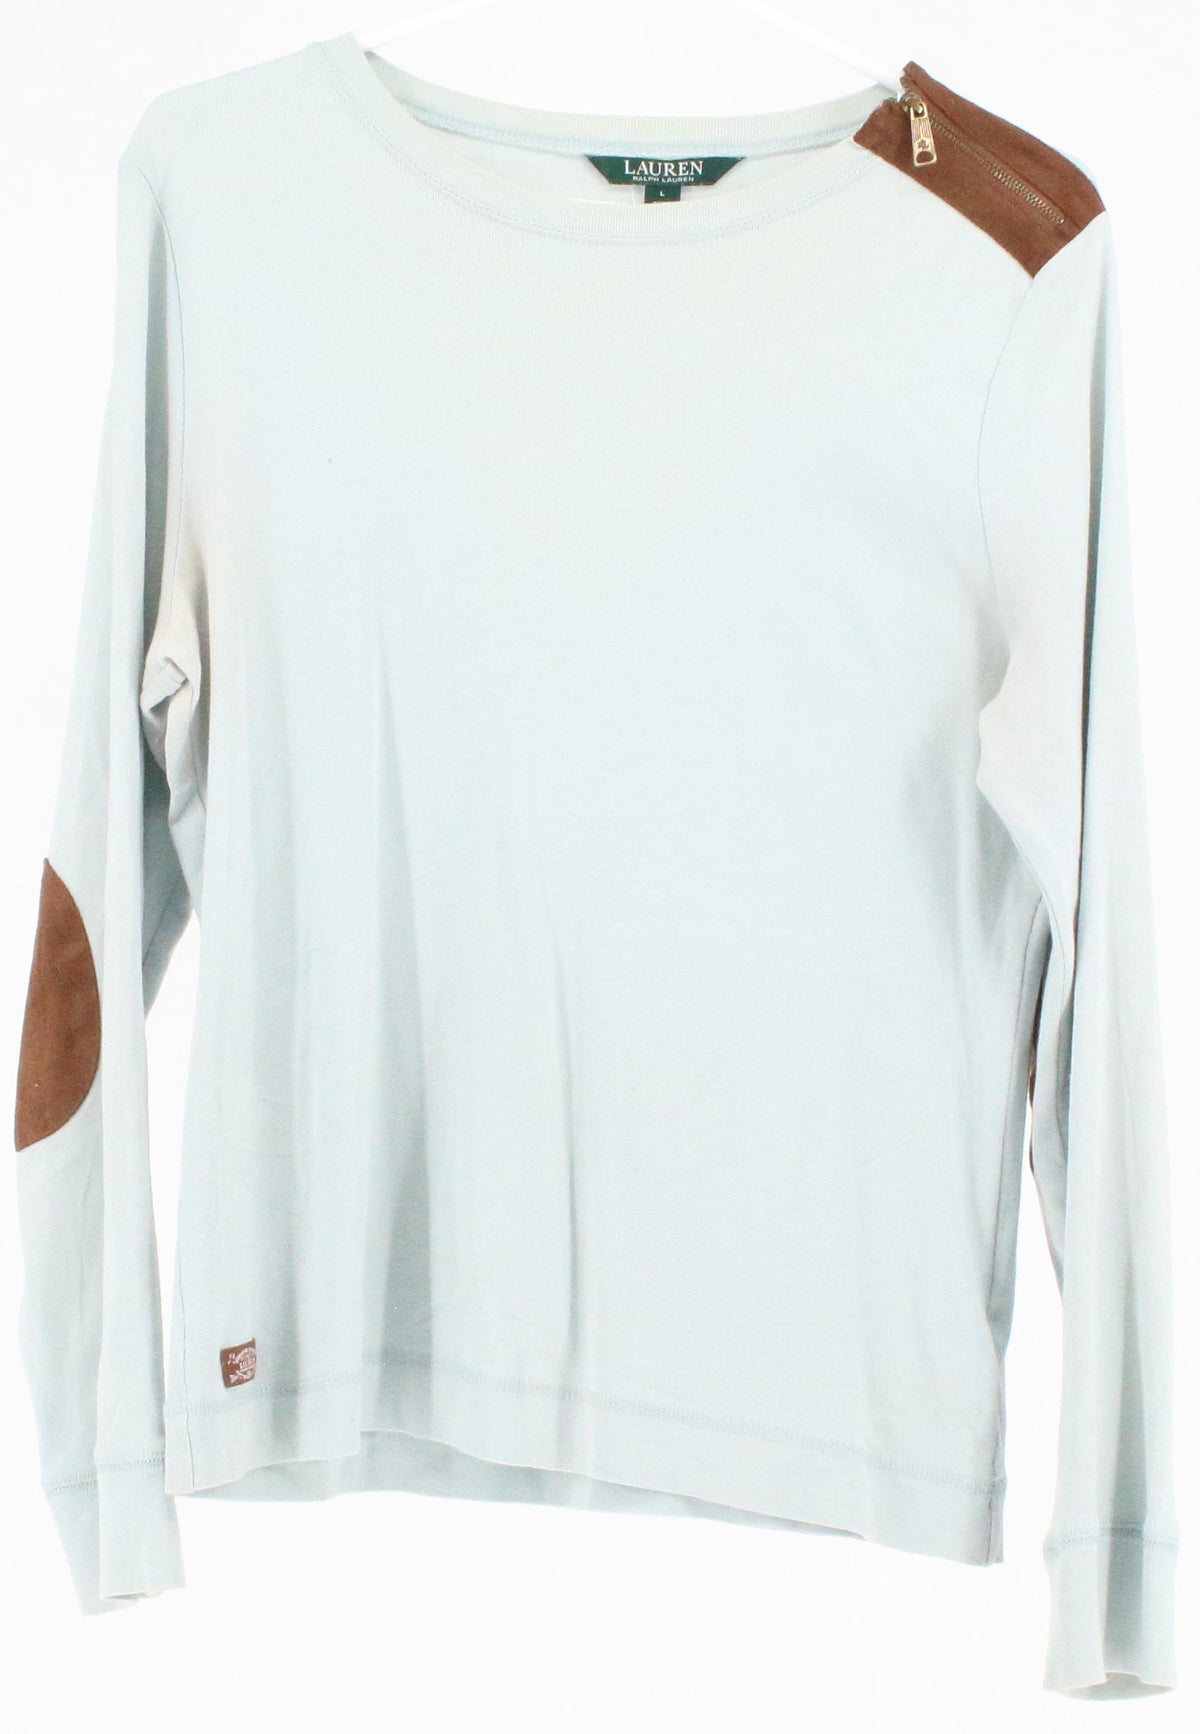 Ralph Lauren Mint Green Round Neck Top With Brown Elbow Patch